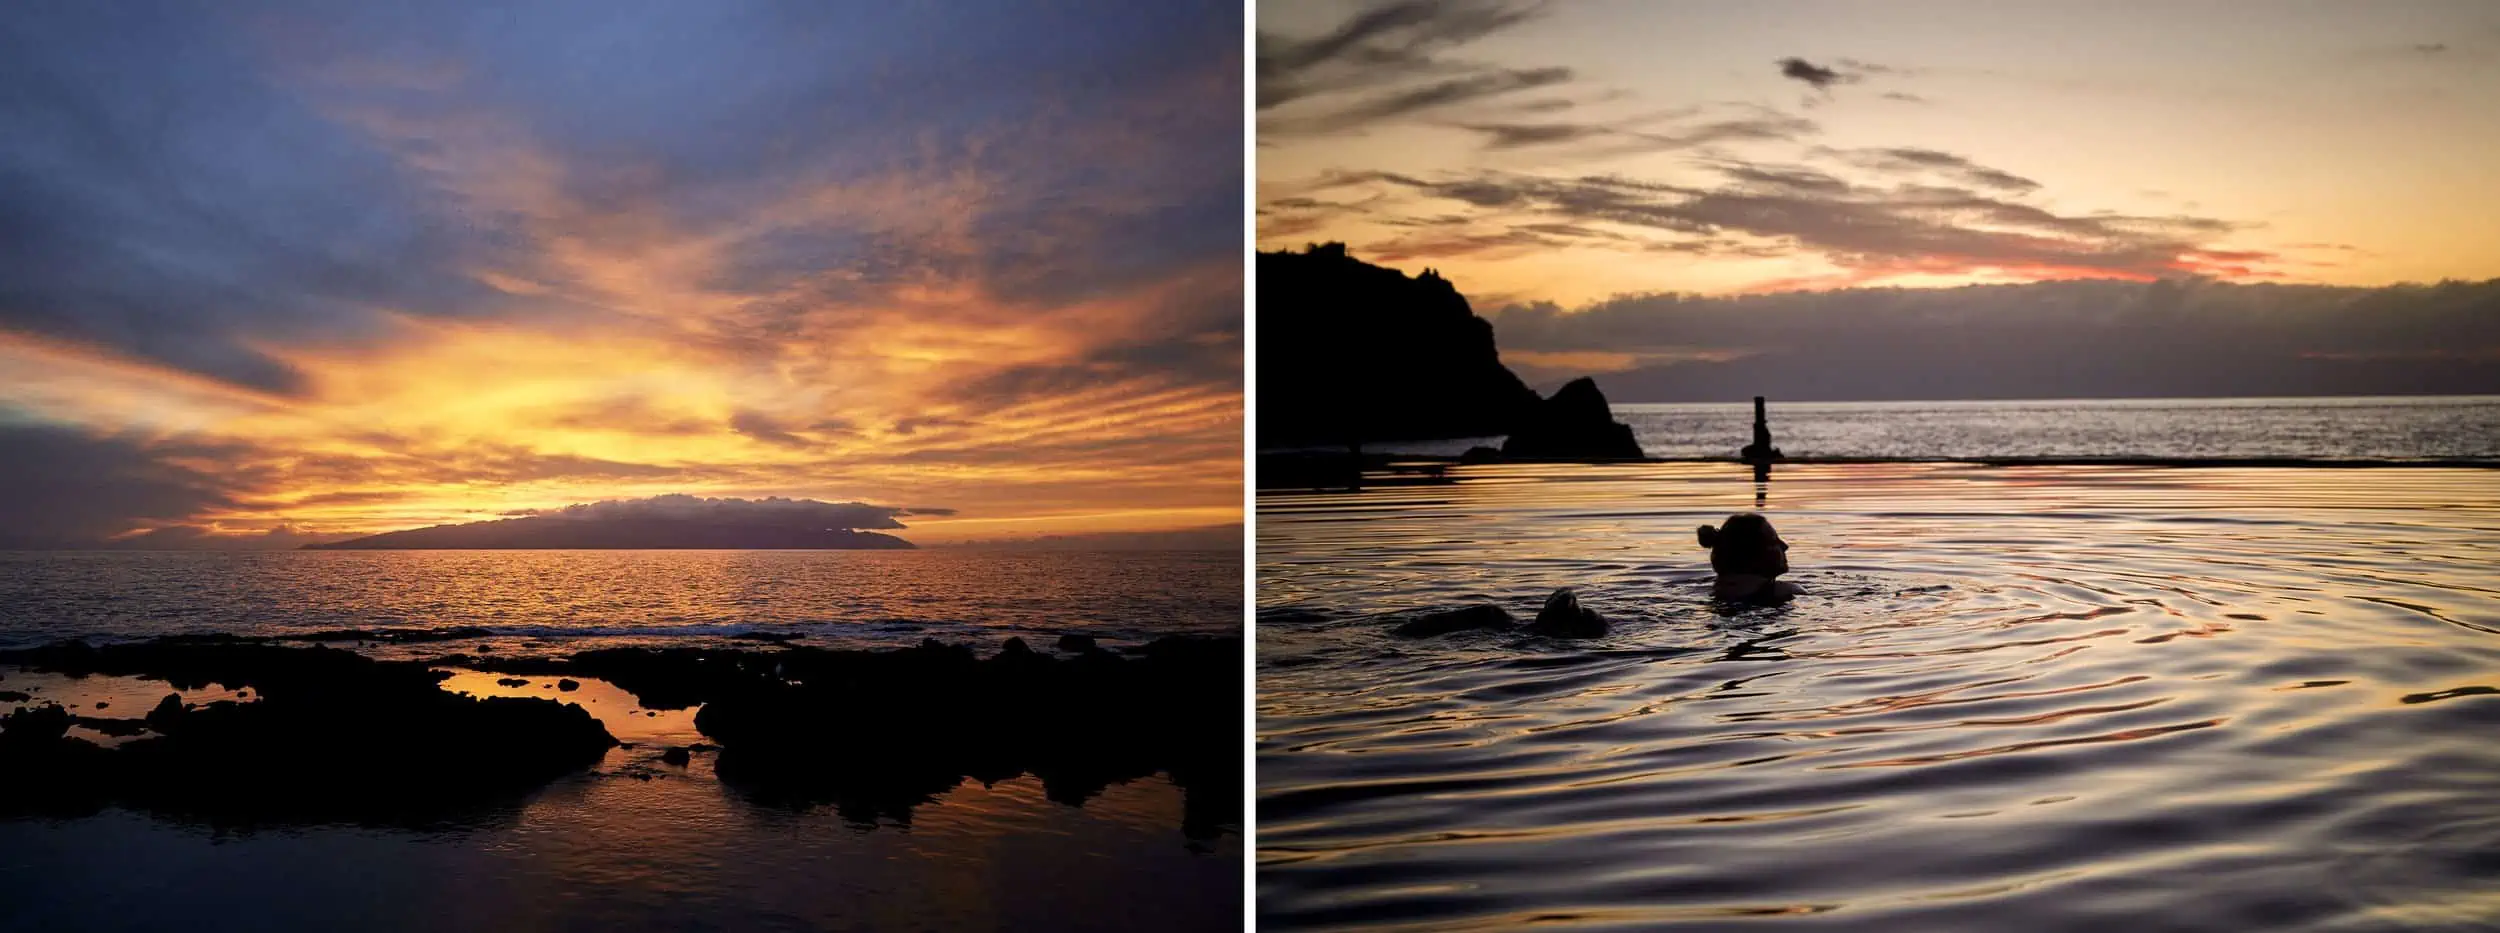 The Best Beaches on Tenerife, Natural Pools and Places to Swim Away from the Crowds - Fm Dsc F Rgb